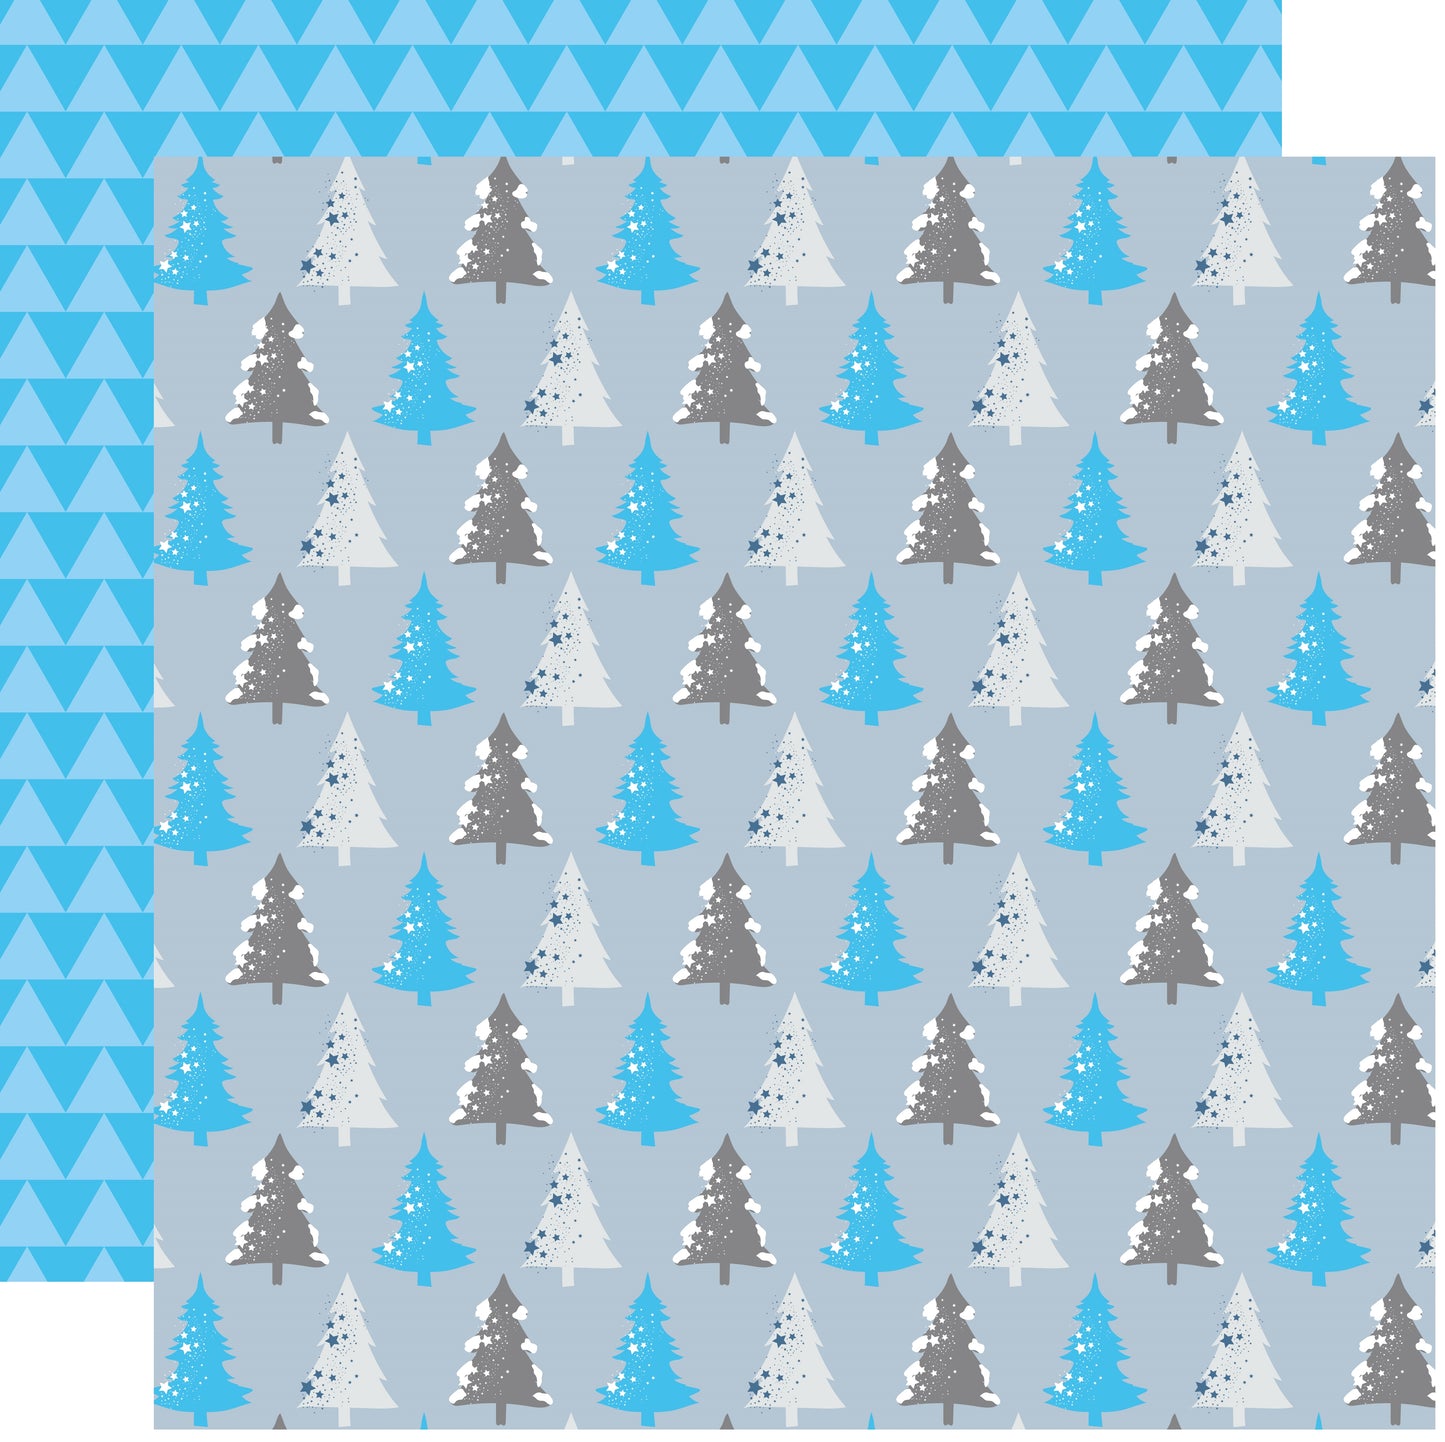 Trees Ice Kingdom Scrapbook Paper by Country Croppers